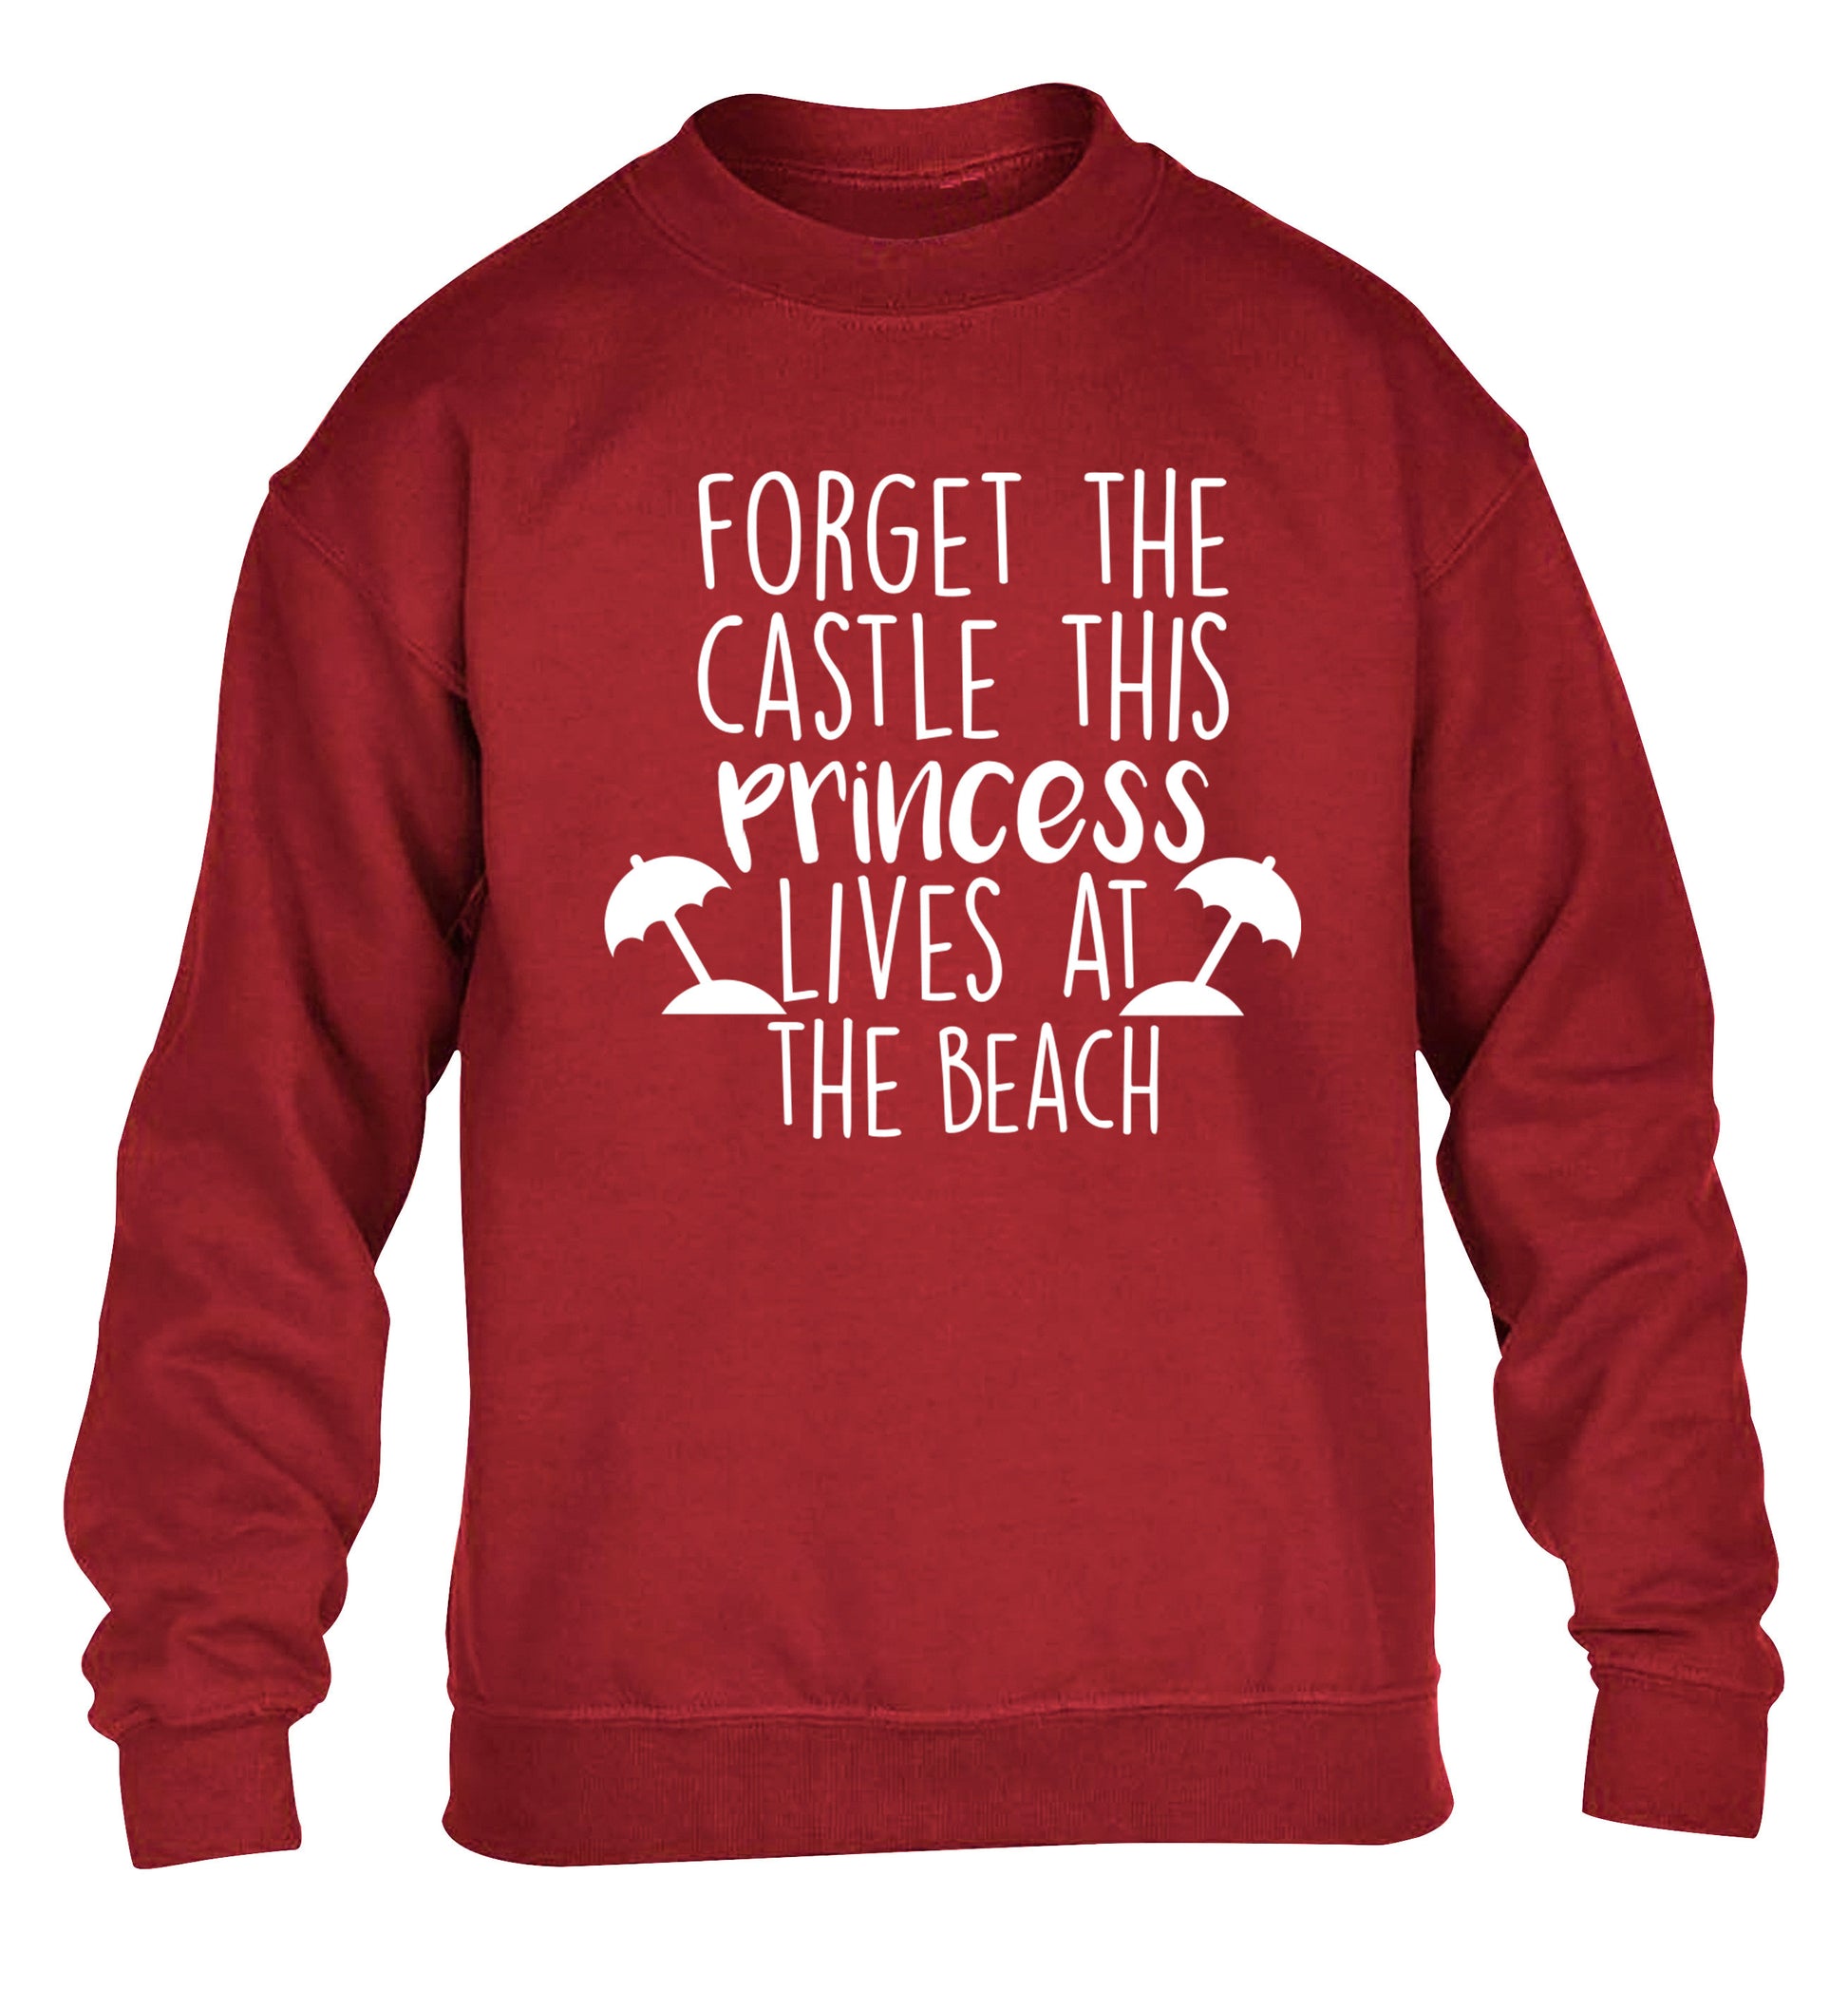 Forget the castle this princess lives at the beach children's grey sweater 12-14 Years